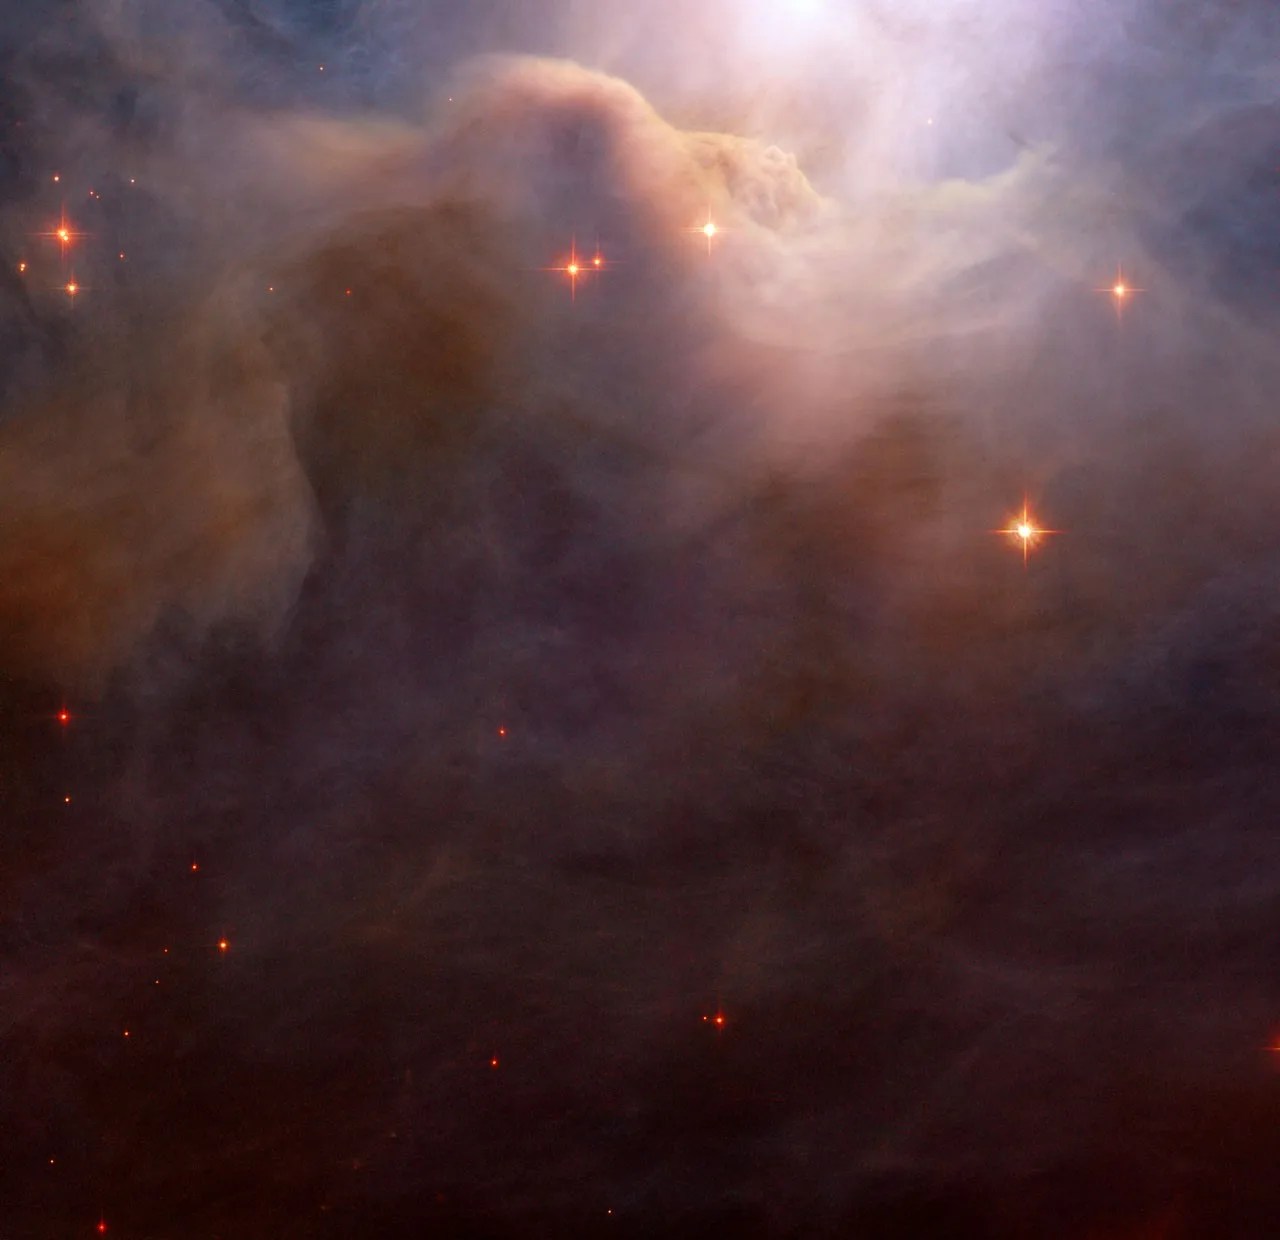 Large cloud of dark purple dust and gas with a few orange stars peppered throughout.